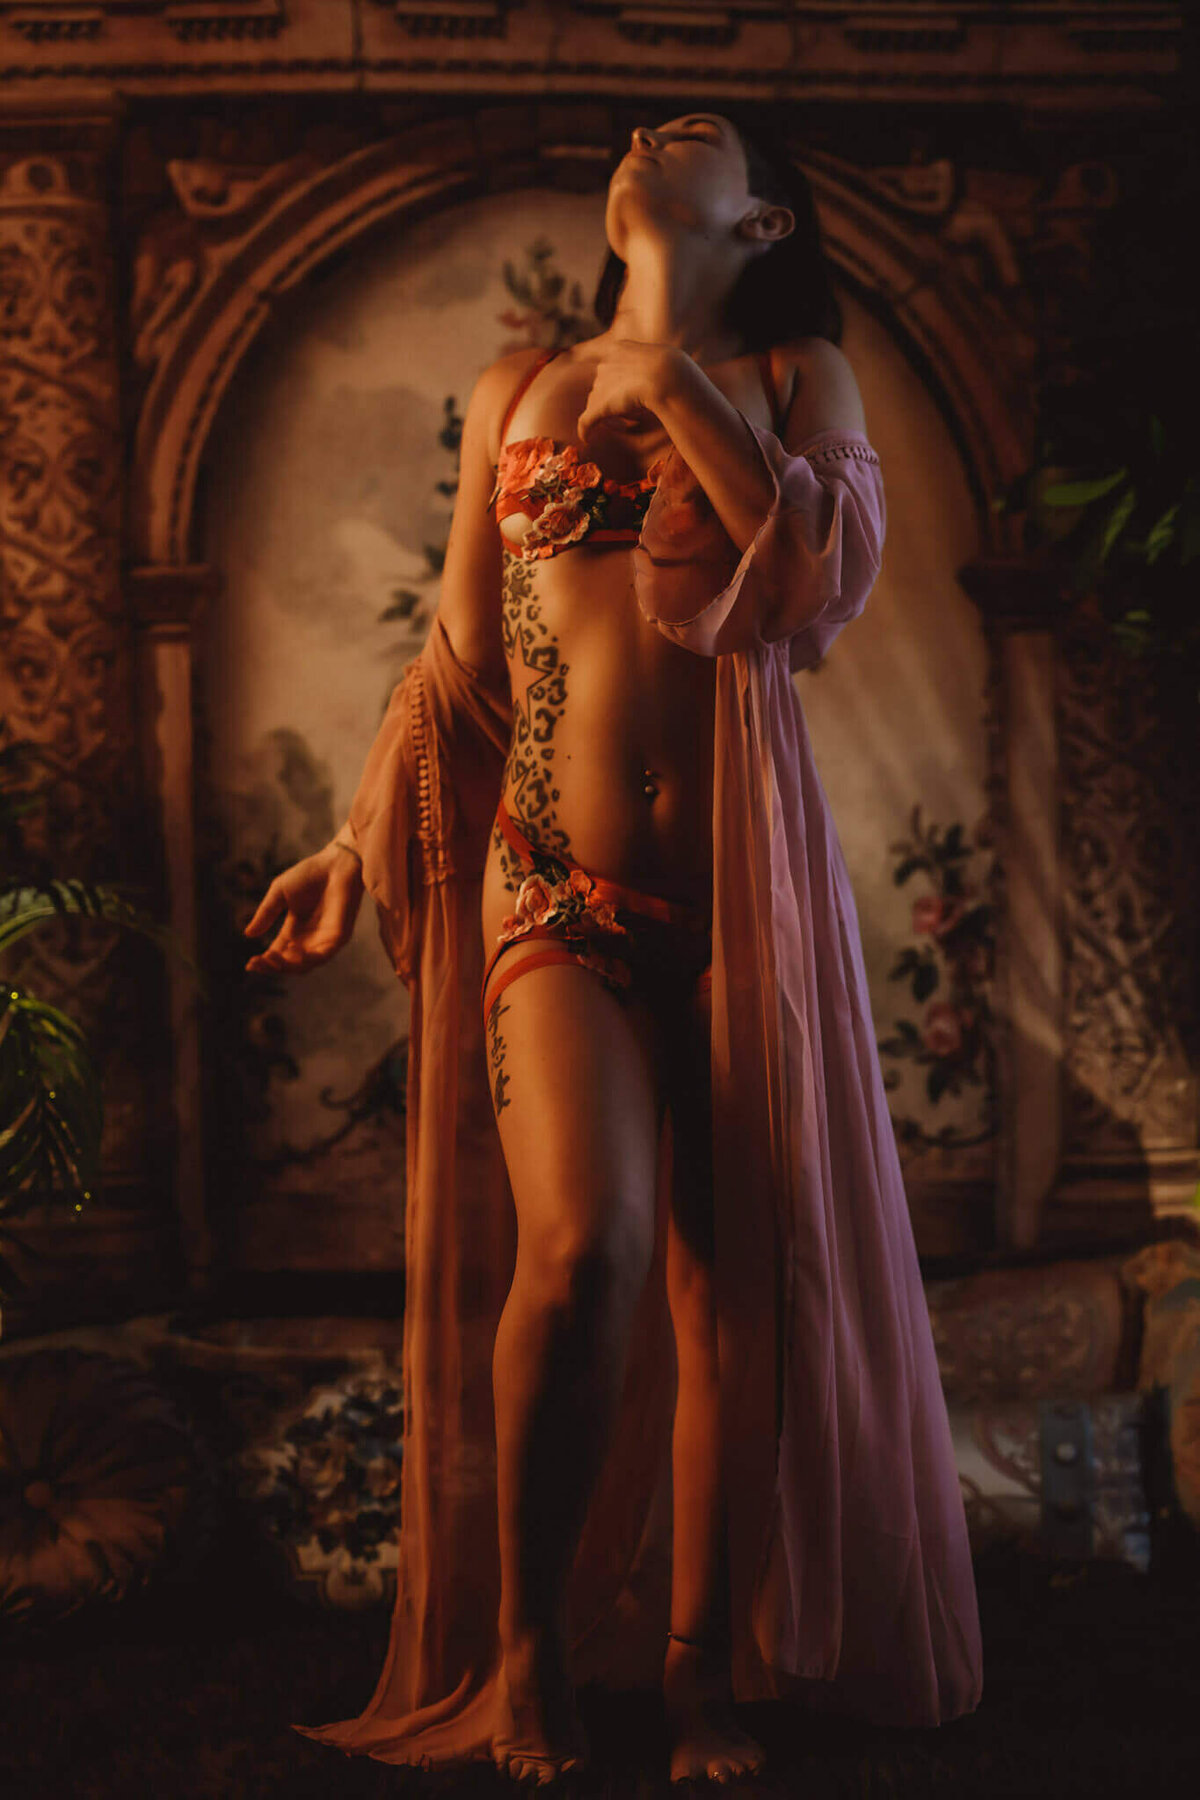 Woman in floral lingerie and a sheer robe standing in front of a backdrop in a DFW boudoir studio